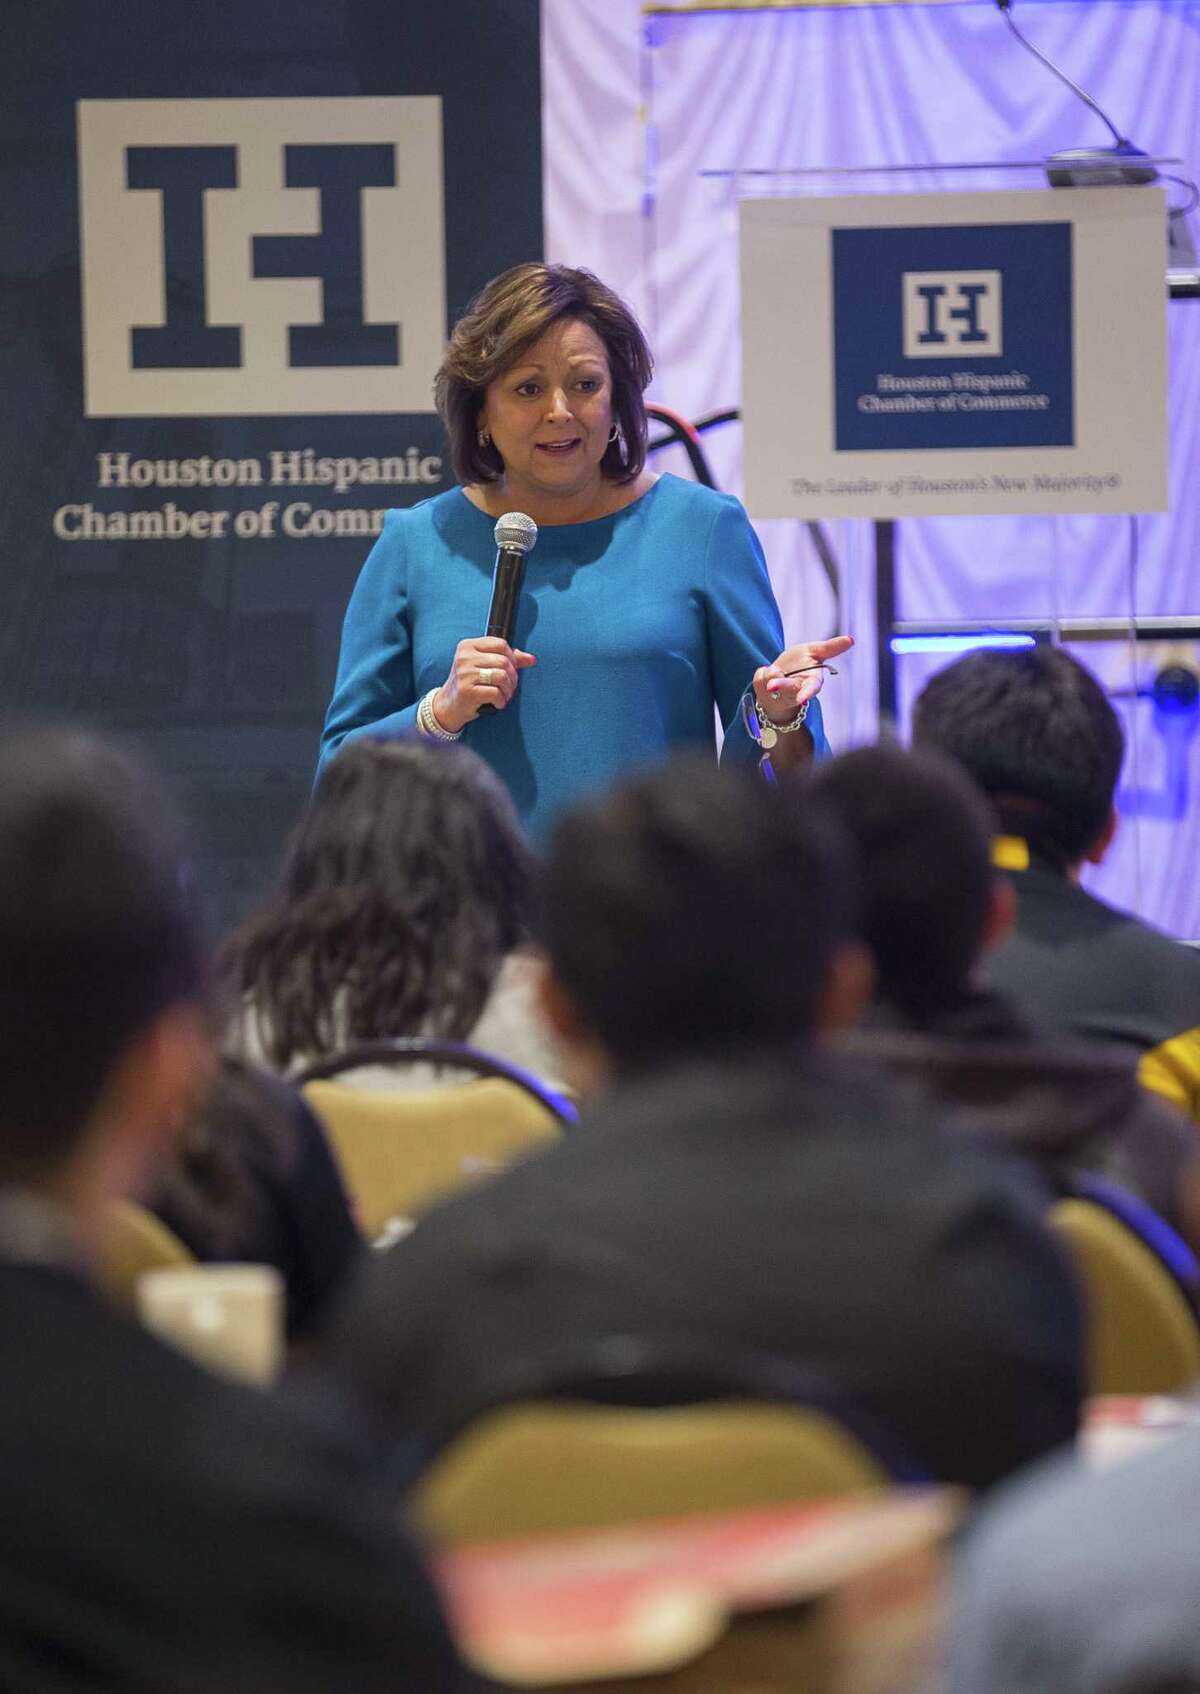 New Mexico Governor Susana Martinez speaks to Houston-area high school students during the Houston Hispanic Chamber of Commerce's Womens Leadership Conference & Business Expo, Thursday, March 15, 2018, in Houston. ( Mark Mulligan / Houston Chronicle )